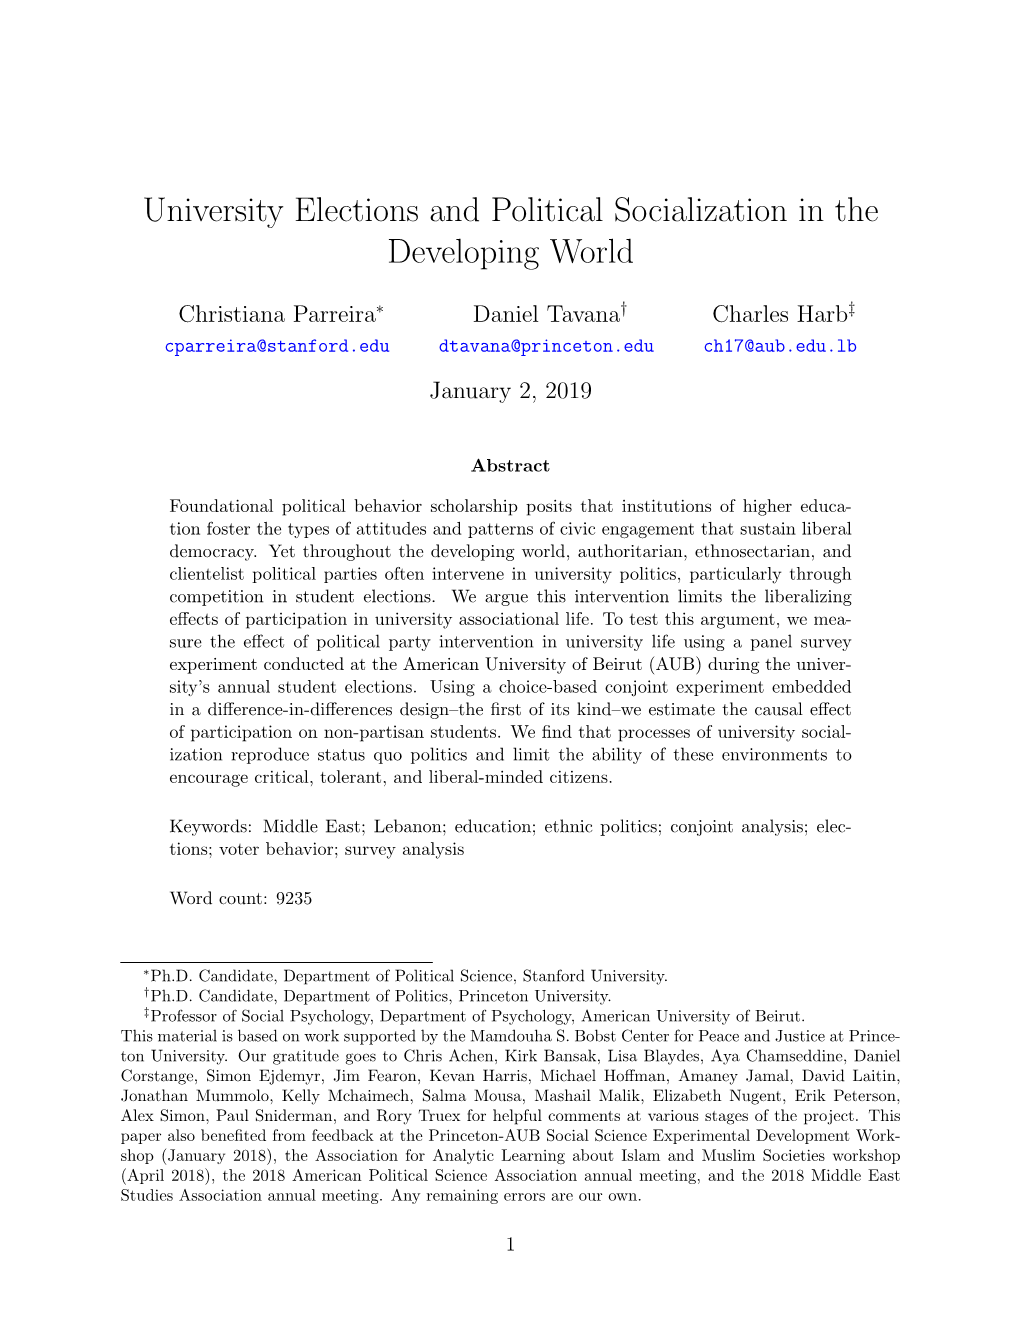 University Elections and Political Socialization in the Developing World